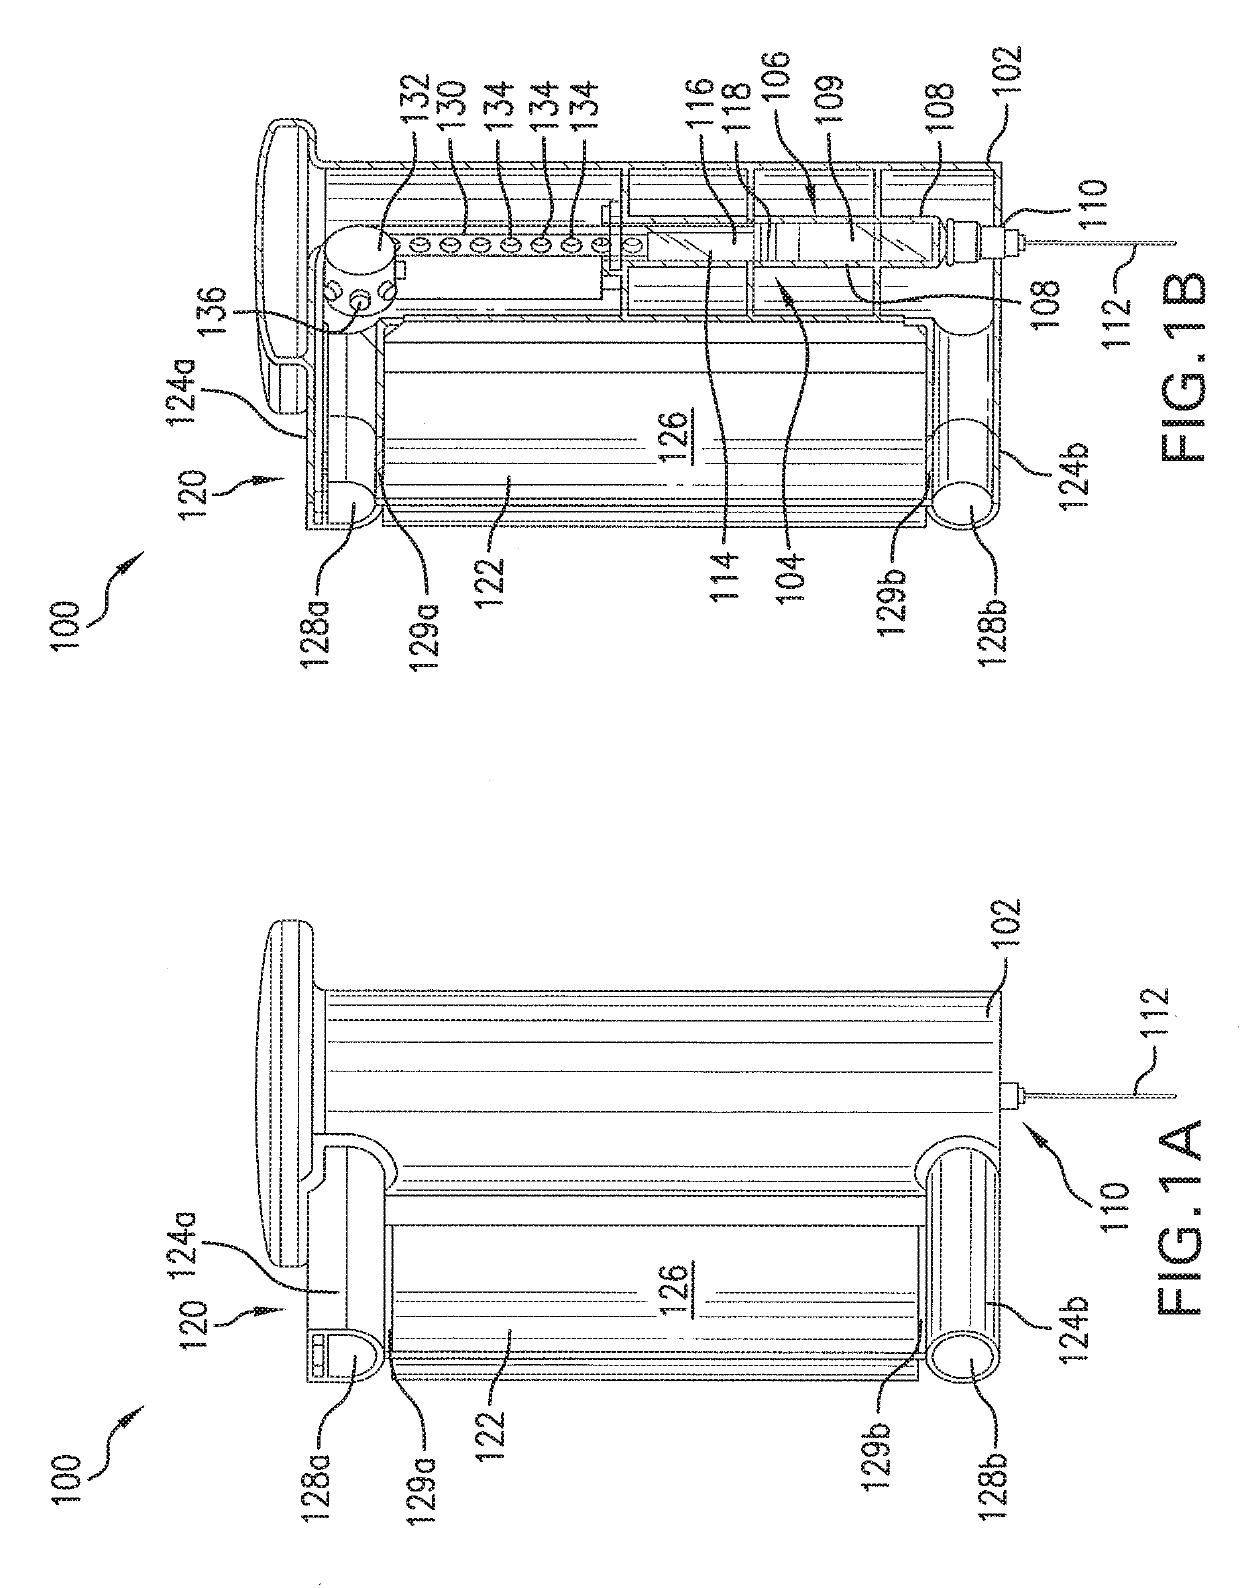 Manually-Actuated Injection Device for High-Viscosity Drugs